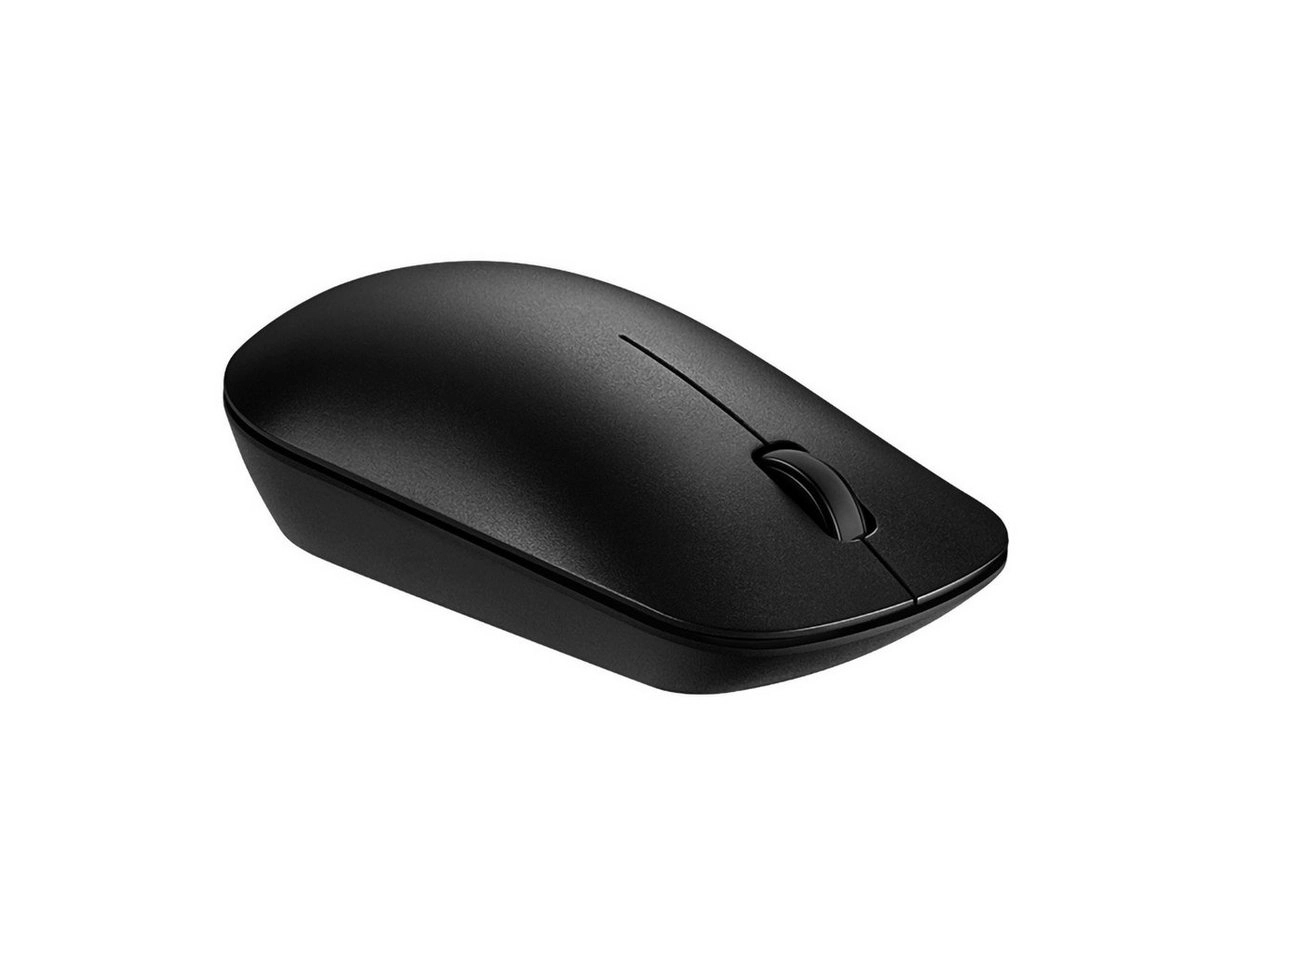 Honor Bluetooth Mouse - Magicbook 2020|Maus|Bluetooth|Schwarz